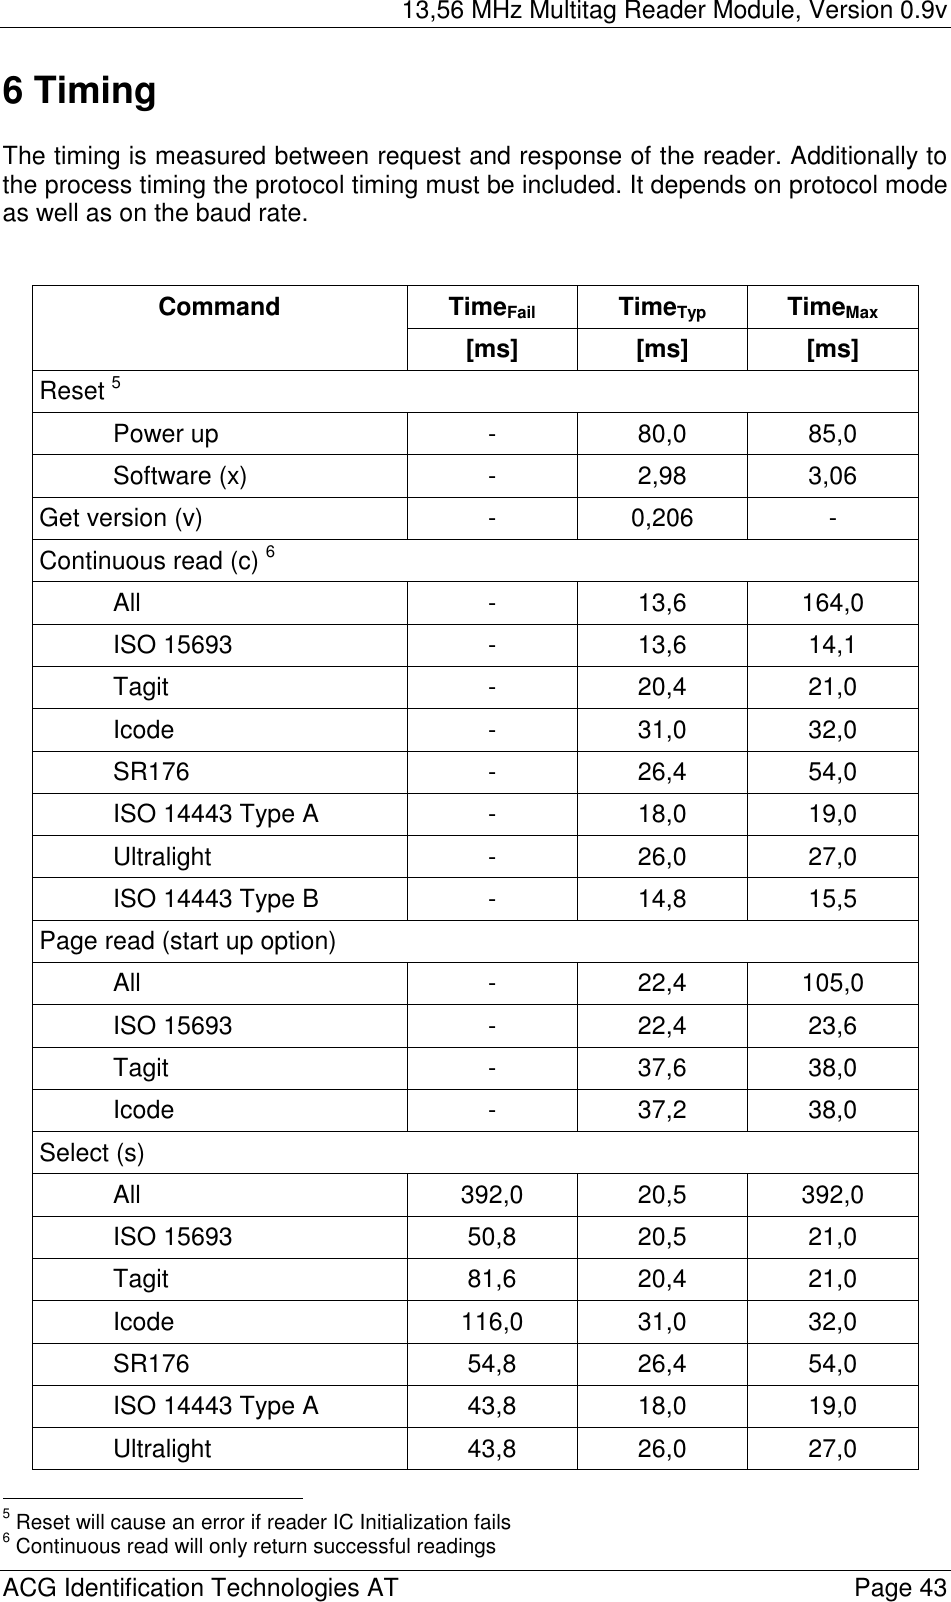 13,56 MHz Multitag Reader Module, Version 0.9v  ACG Identification Technologies AT    Page 43 6 Timing  The timing is measured between request and response of the reader. Additionally to the process timing the protocol timing must be included. It depends on protocol mode as well as on the baud rate.   TimeFail TimeTyp TimeMax Command [ms] [ms] [ms] Reset 5 Power up  -  80,0  85,0 Software (x)  -  2,98  3,06 Get version (v)  -  0,206  - Continuous read (c) 6 All - 13,6 164,0 ISO 15693  -  13,6  14,1 Tagit - 20,4 21,0 Icode - 31,0 32,0 SR176 - 26,4 54,0 ISO 14443 Type A  -  18,0  19,0 Ultralight - 26,0 27,0 ISO 14443 Type B  -  14,8  15,5 Page read (start up option) All - 22,4 105,0 ISO 15693  -  22,4  23,6 Tagit - 37,6 38,0 Icode - 37,2 38,0 Select (s) All 392,0 20,5 392,0 ISO 15693  50,8  20,5  21,0 Tagit 81,6 20,4 21,0 Icode 116,0 31,0 32,0 SR176 54,8 26,4 54,0 ISO 14443 Type A  43,8  18,0  19,0 Ultralight 43,8 26,0 27,0                                             5 Reset will cause an error if reader IC Initialization fails 6 Continuous read will only return successful readings 